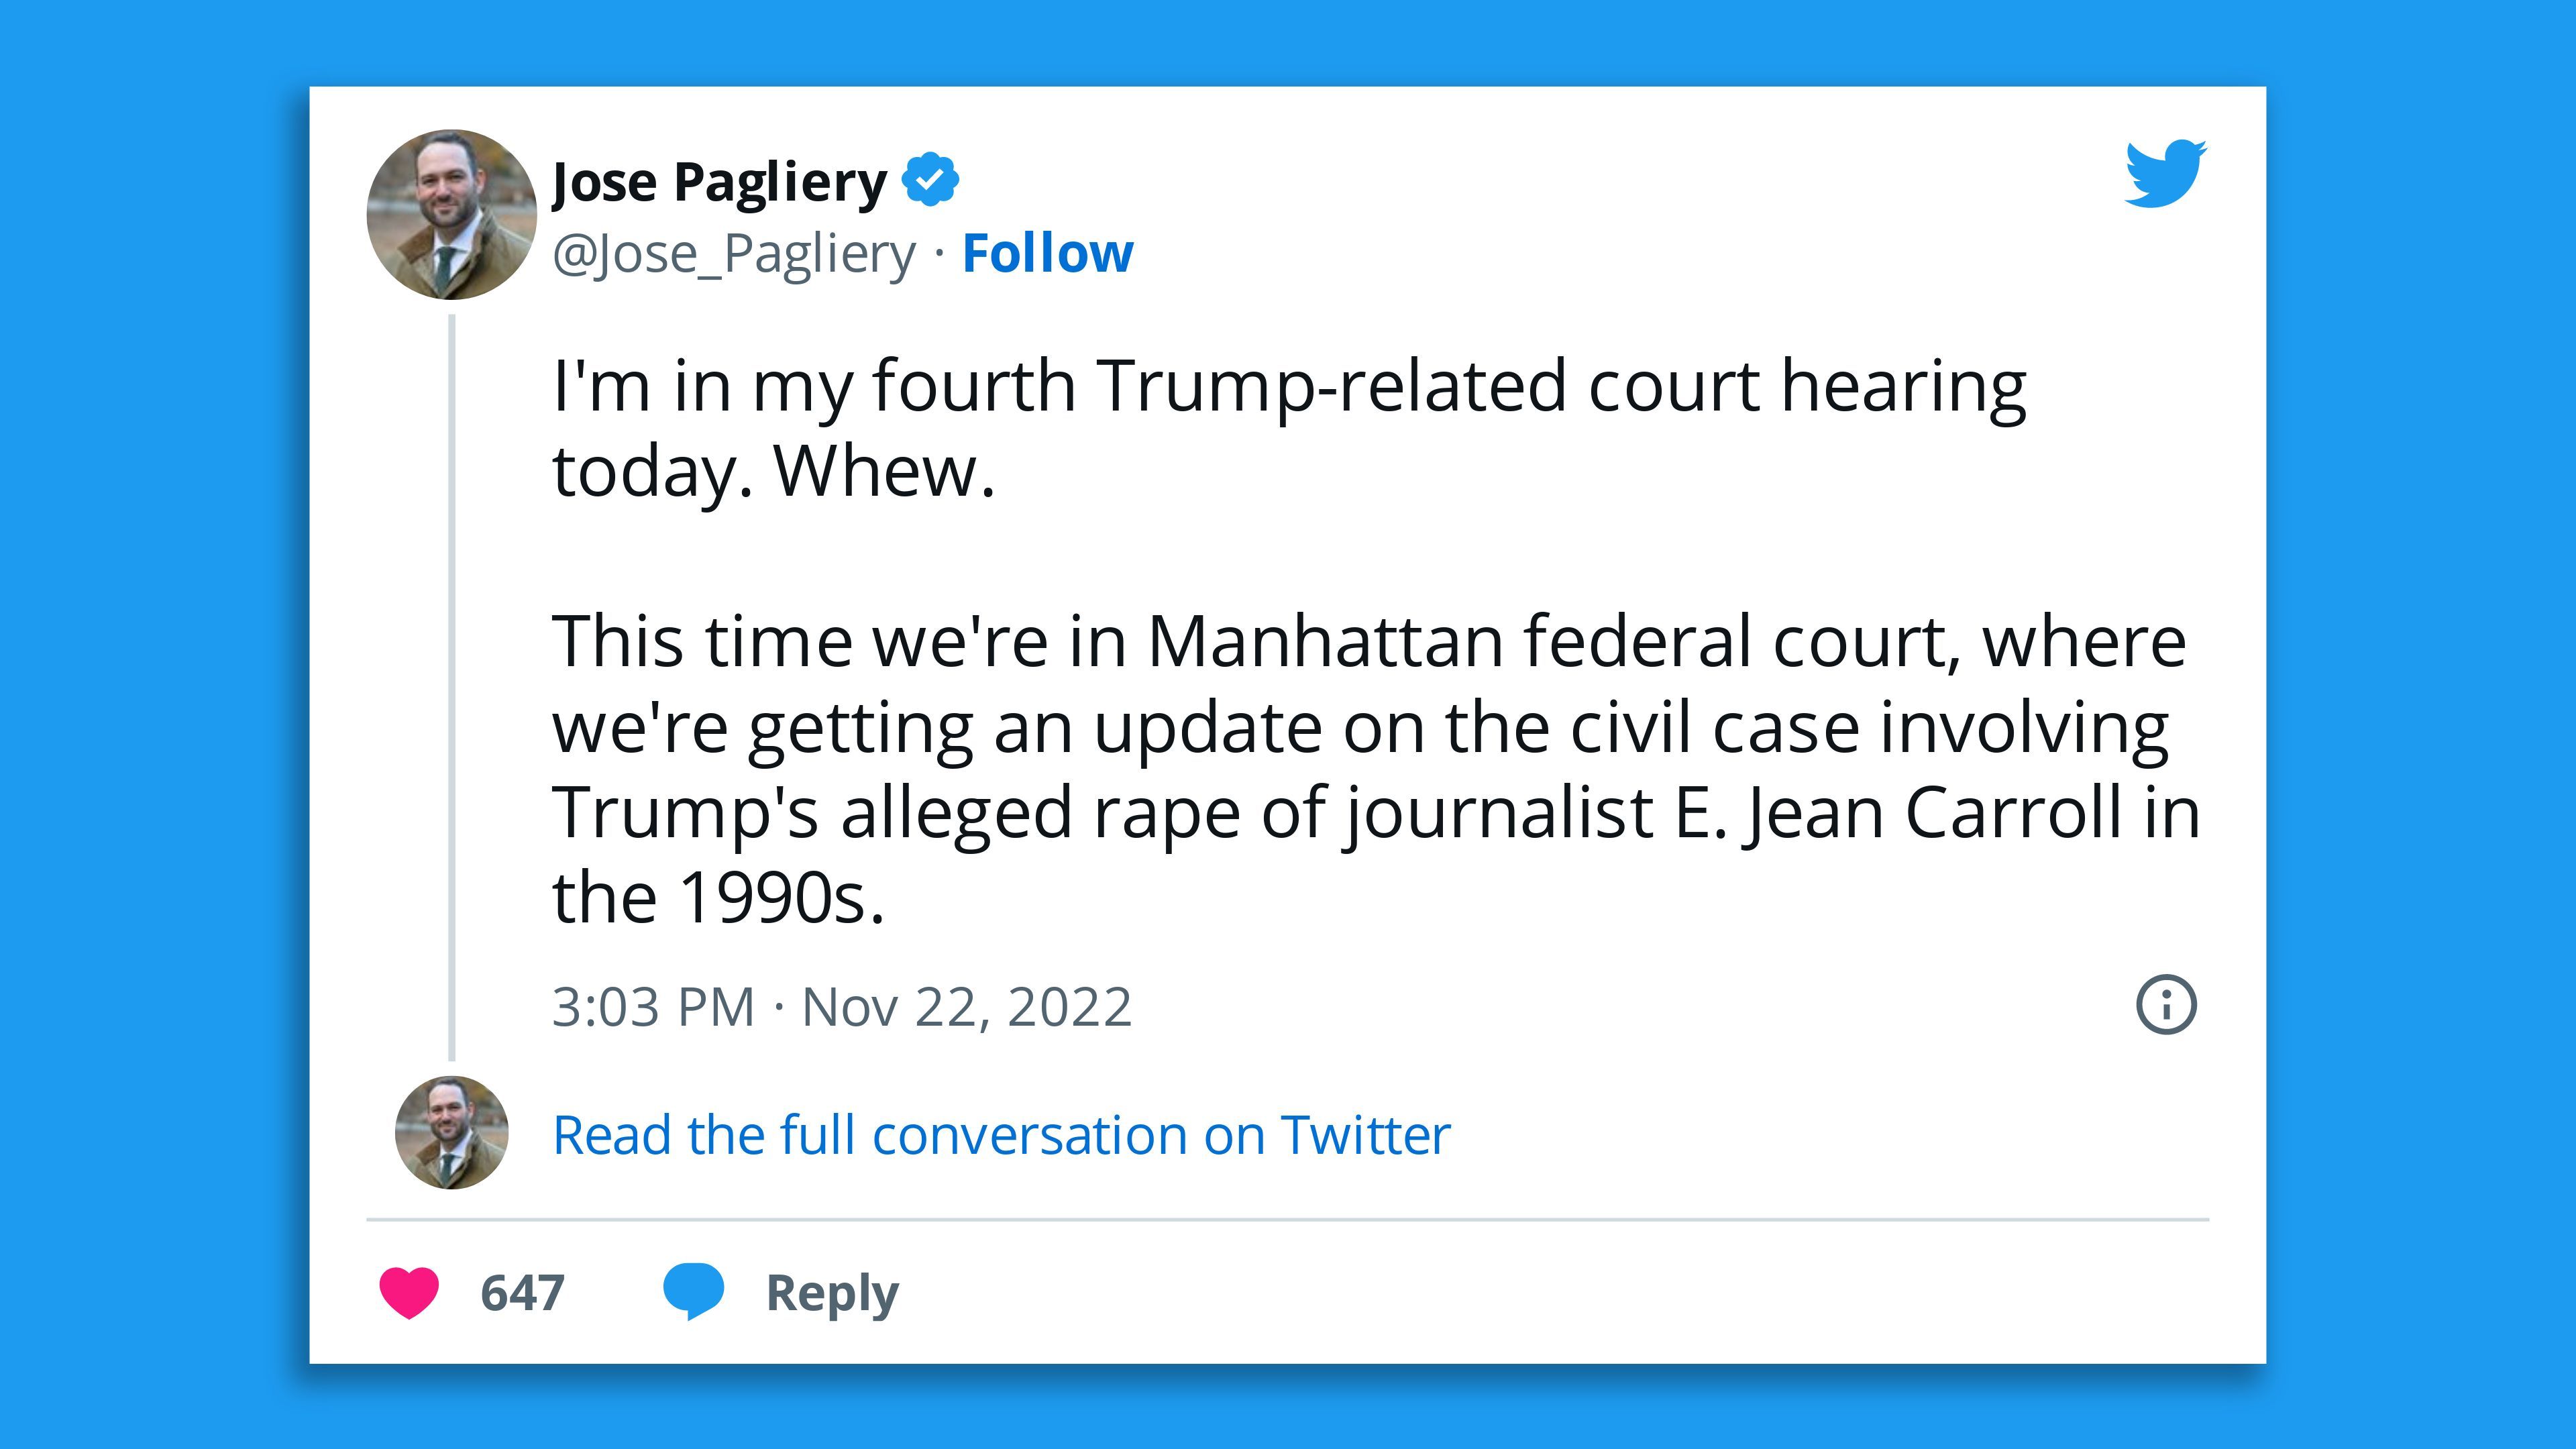 Tweet about Trump legal issues